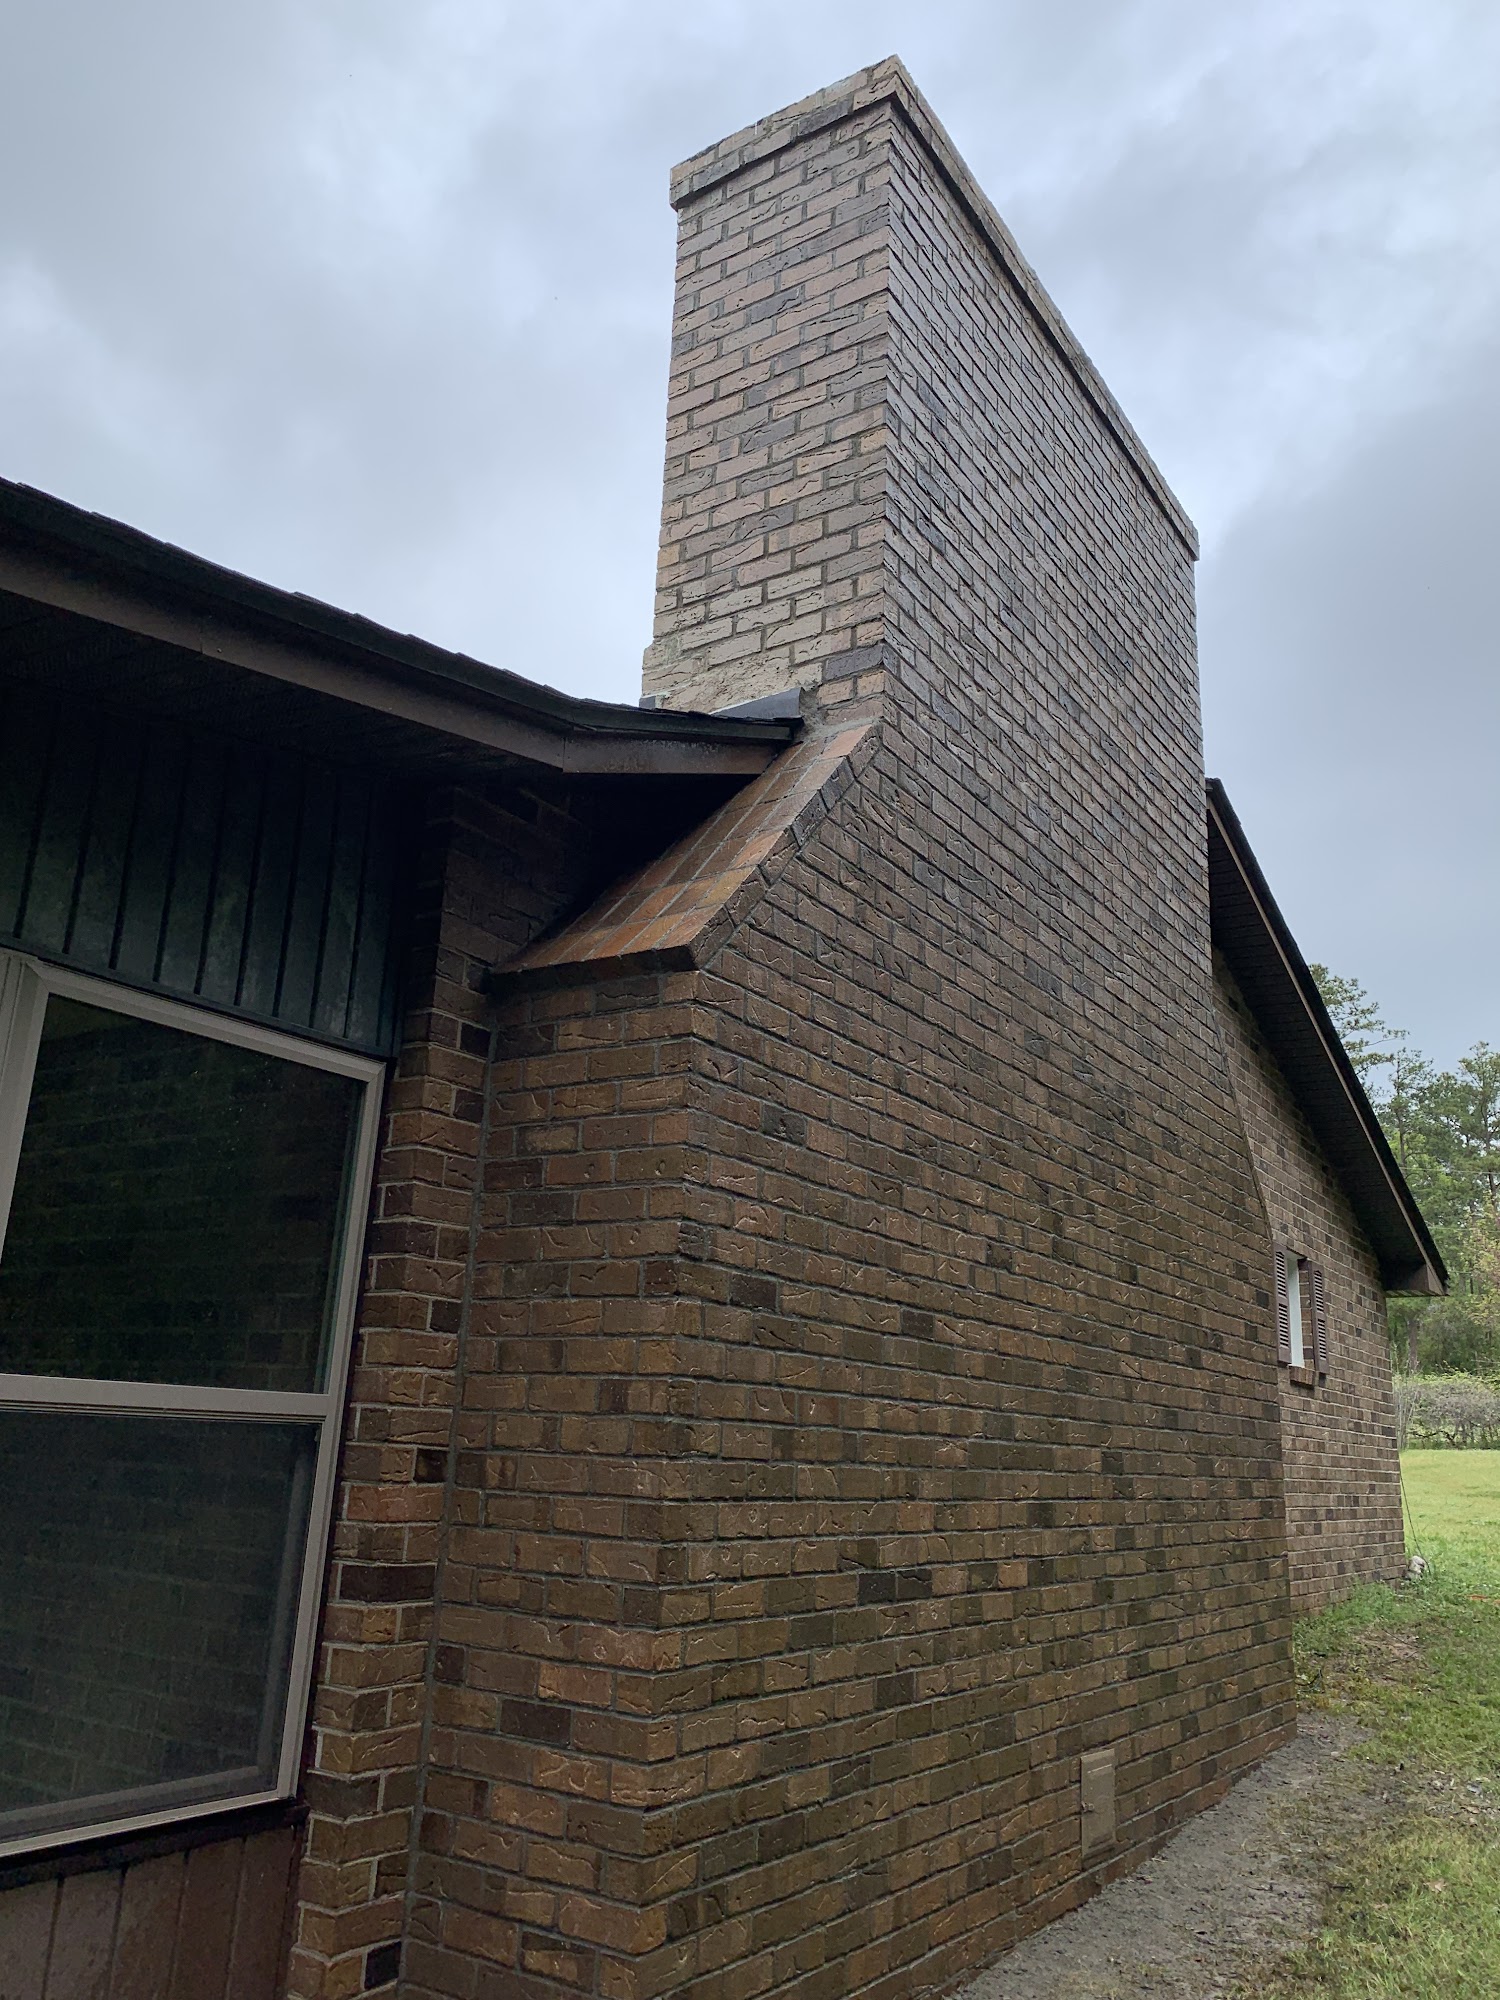 Coles chimney and brick repair services 365 Fishers Cove Rd, Fair Play South Carolina 29643